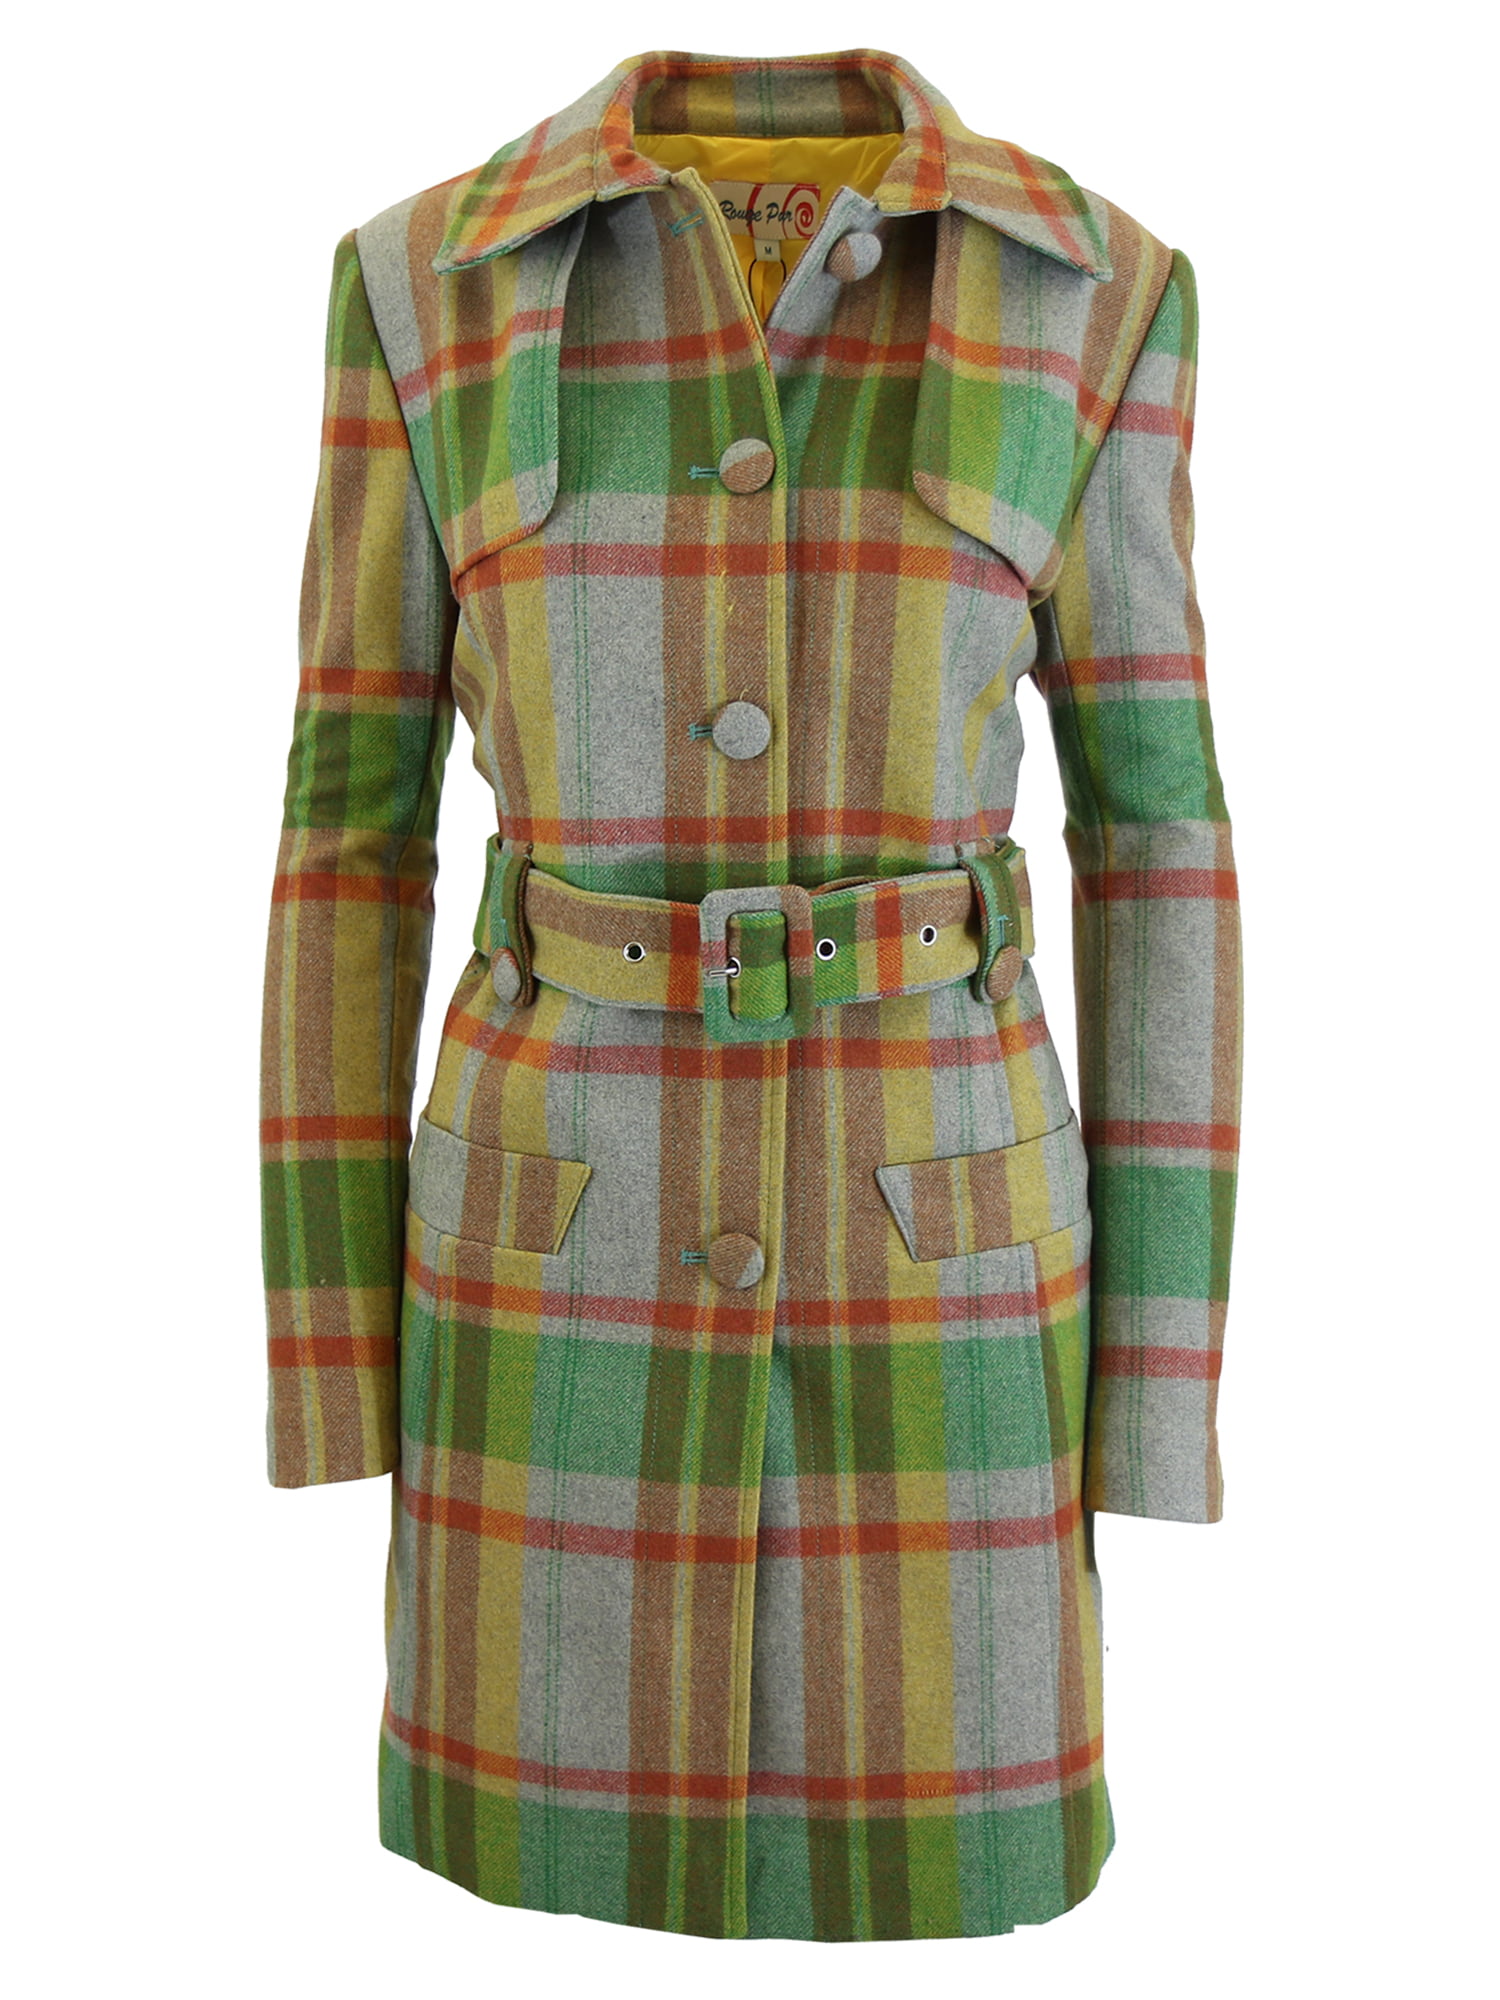 Women?s Wool Plaid Trench Coat Jacket With Belt - SLIM-FIT DESIGN ...